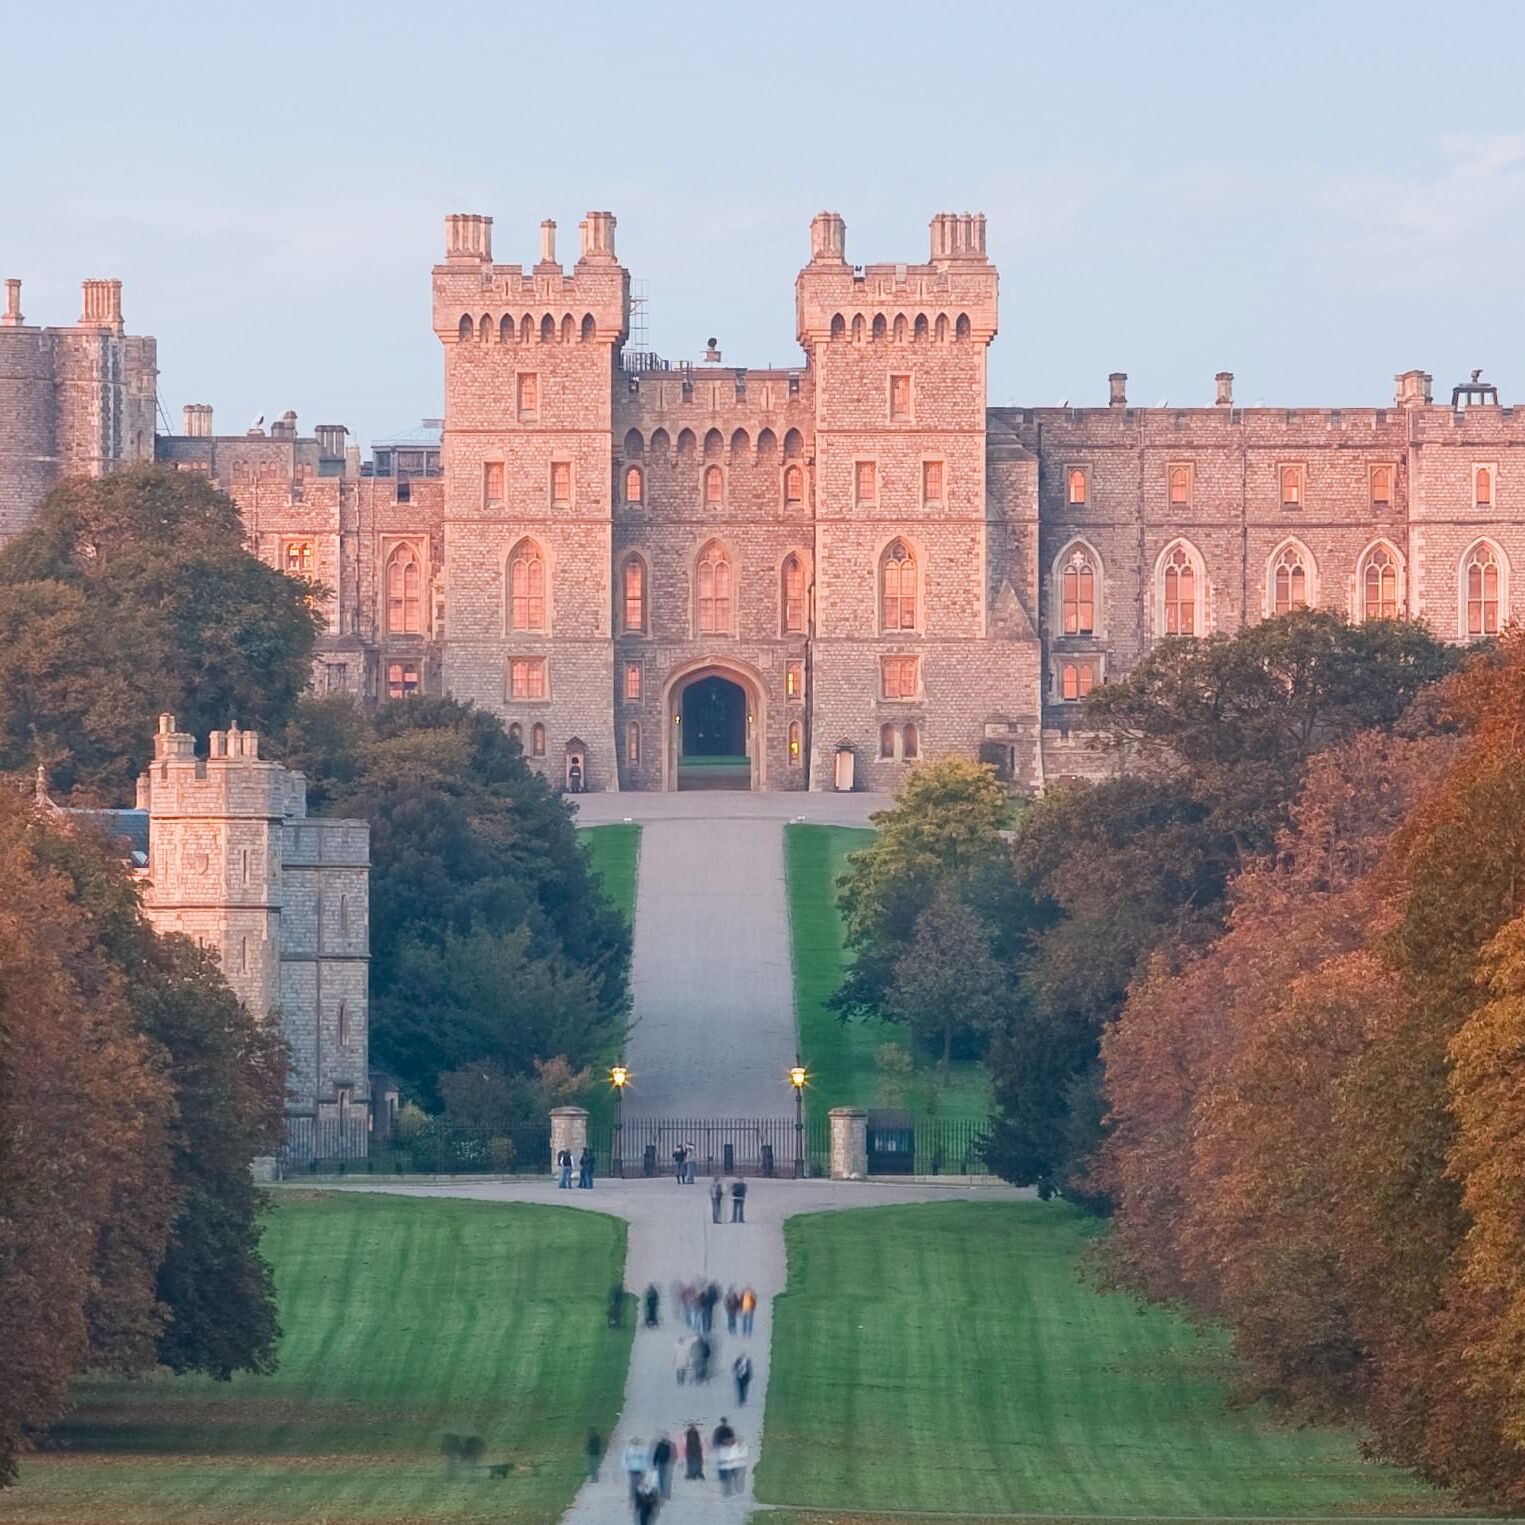 Windsor_Castle_at_Sunset Photo by DAVID ILIFF. License CC BY-SA 3.0 2